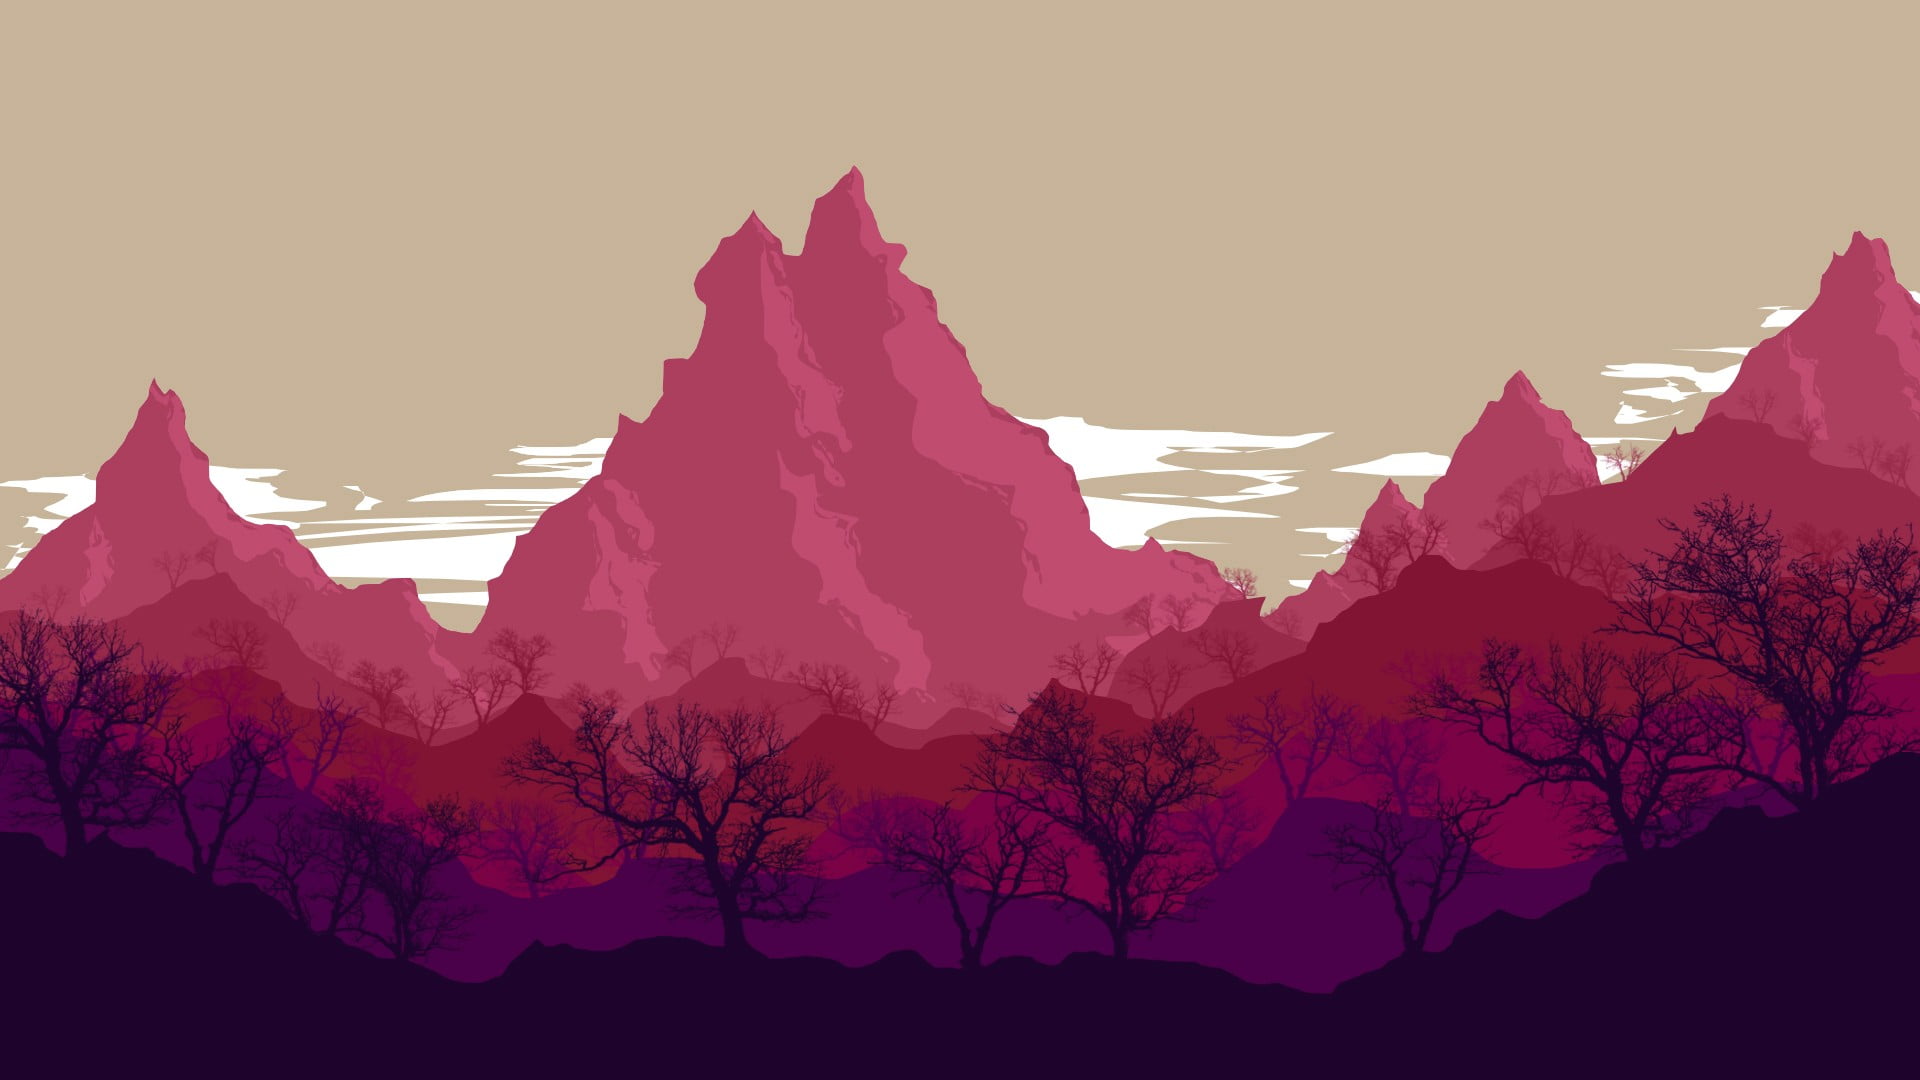 Pink Mountain Illustration Hd Wallpaper - Advance New Year Wishes 2019 , HD Wallpaper & Backgrounds